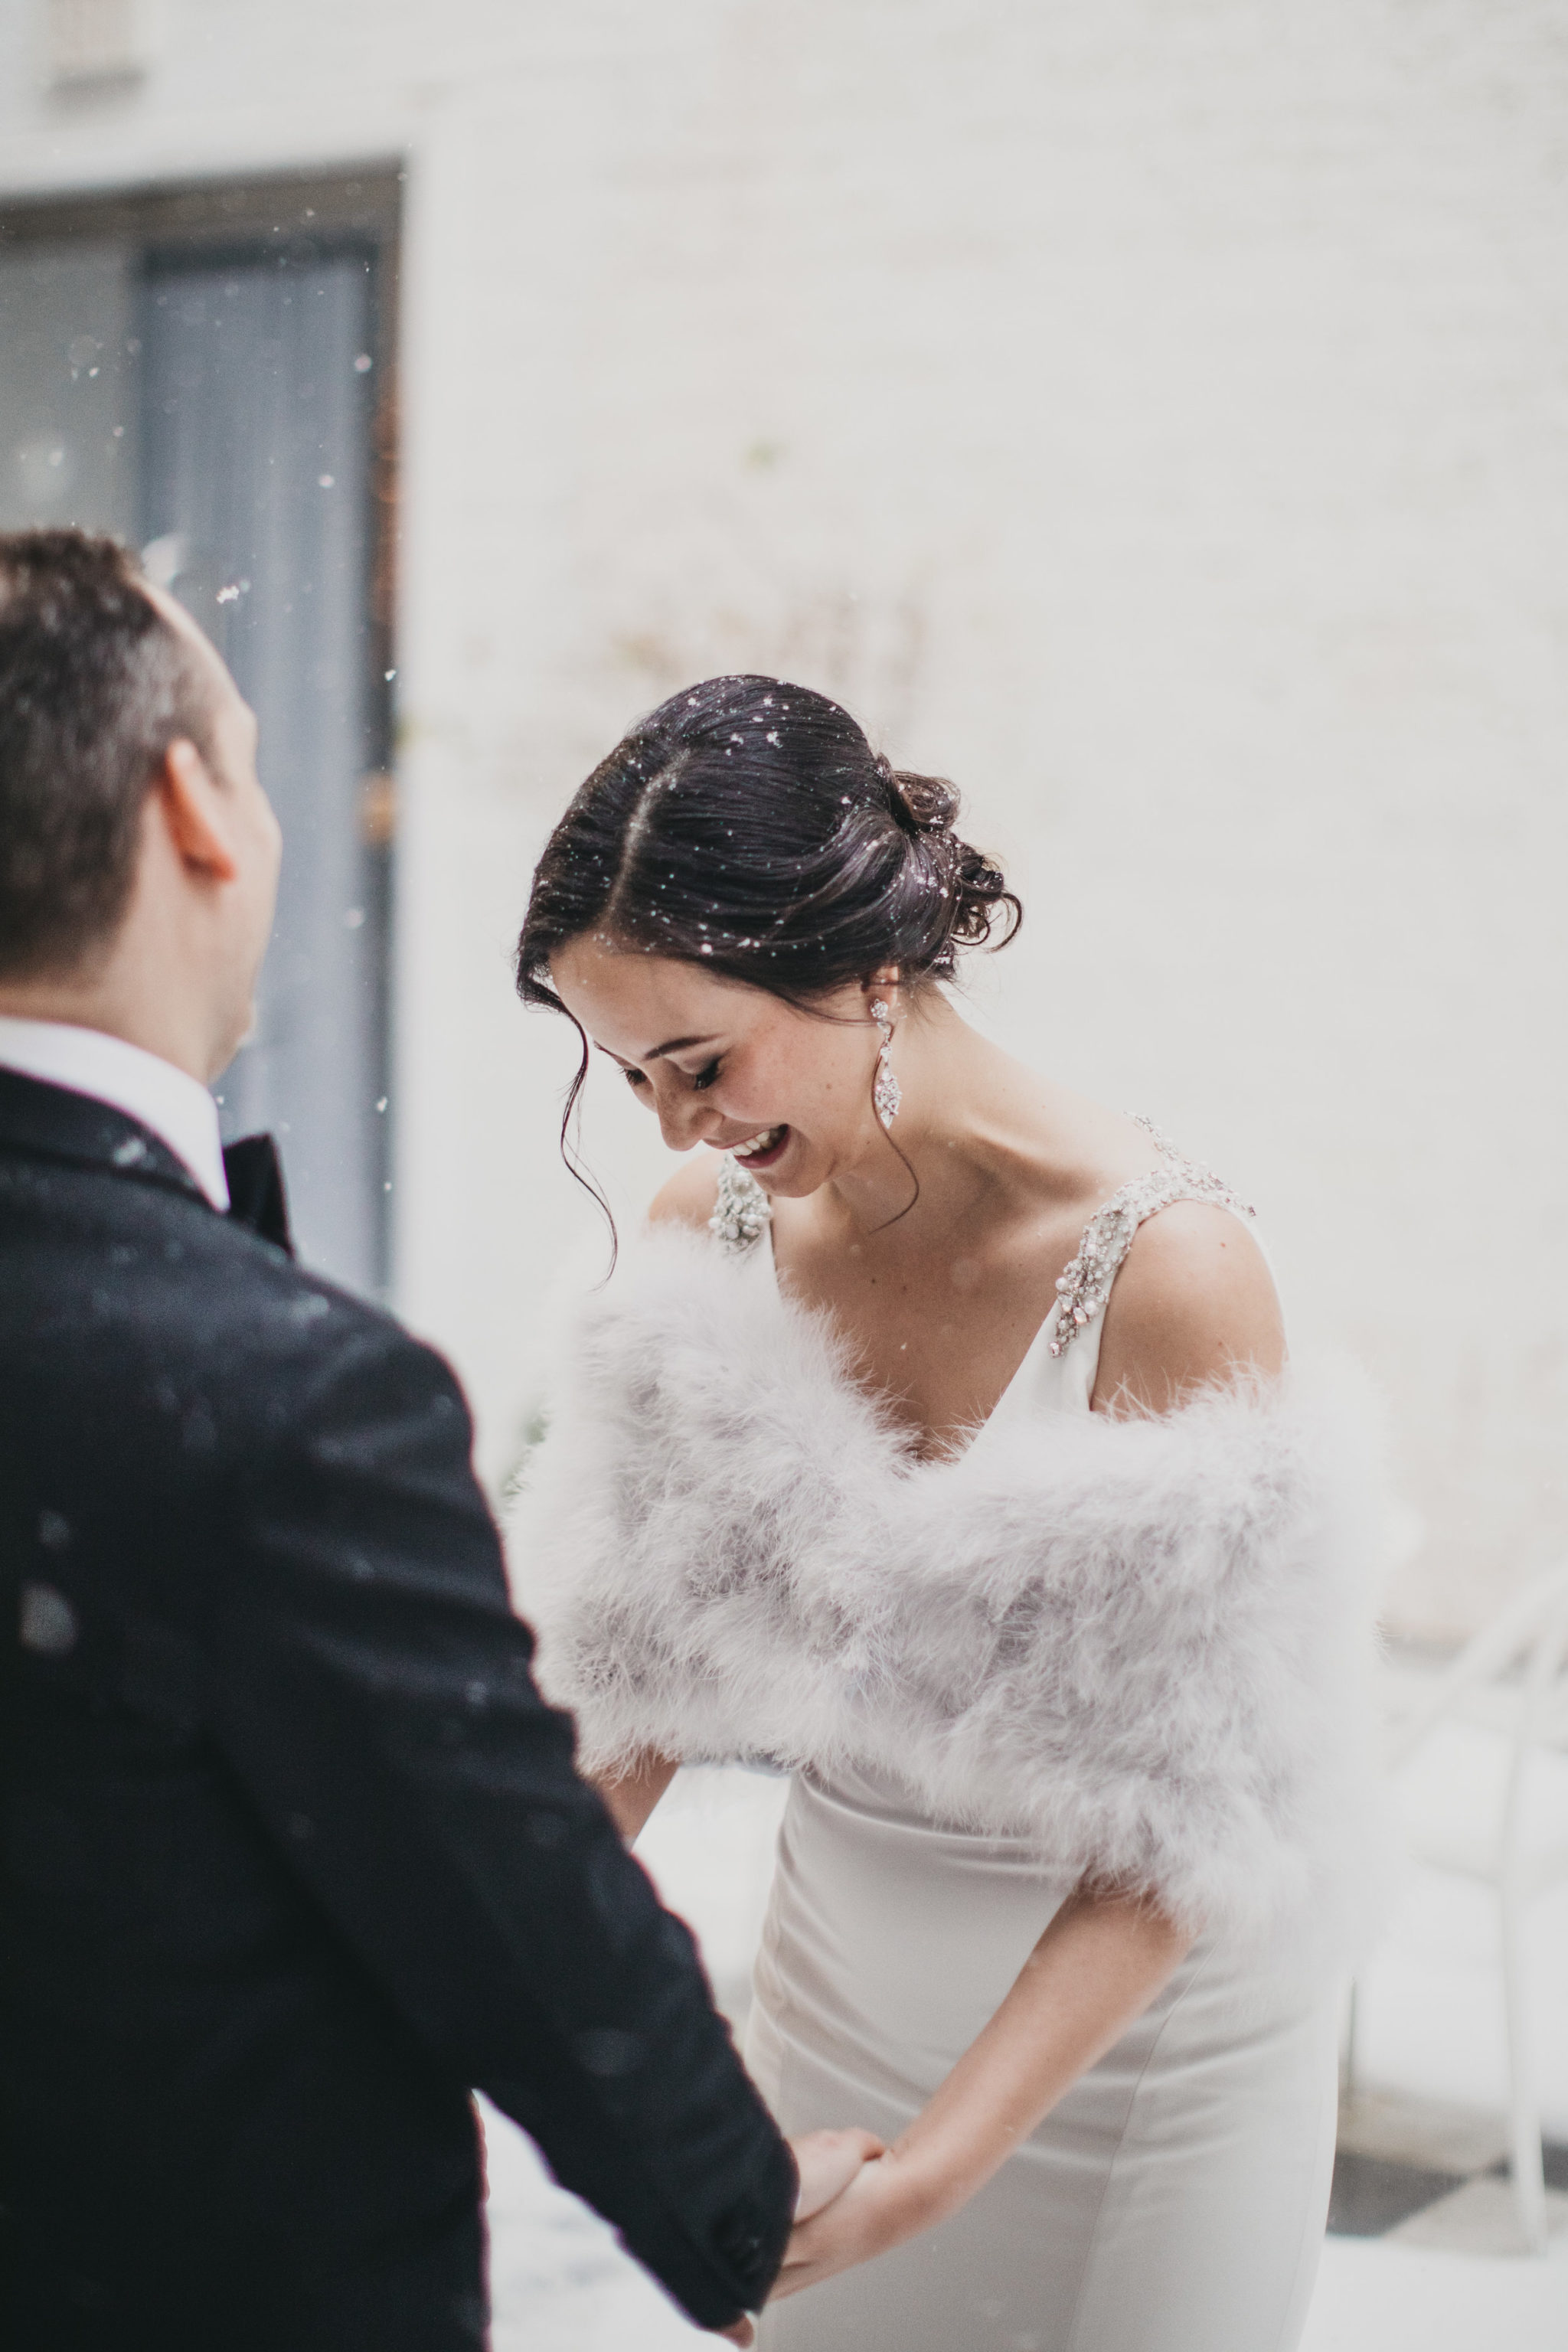 Bride with dark hair and white fur bolero is covered in snow flurries as she looks down and laughs while holding hands with her groom in a photo by Betty Clicker